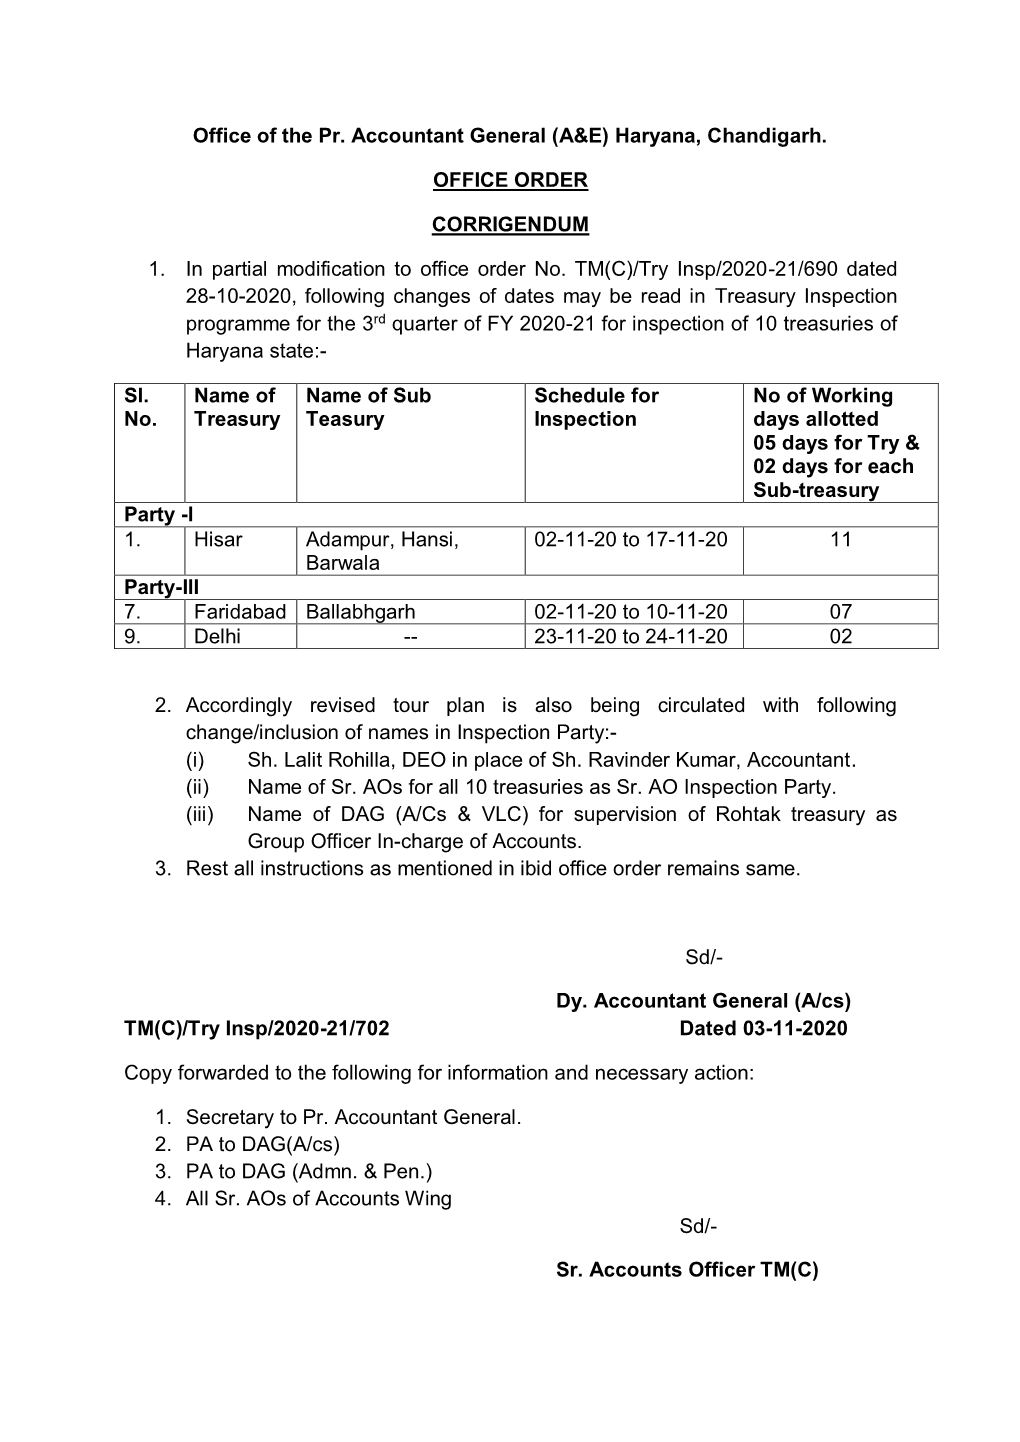 Tour Programme for Inspection Treasuries Along with Its Sub-Treasuries for the Account of 2019-20 to Be Conducted in 3Rd Quarter of 2020-21